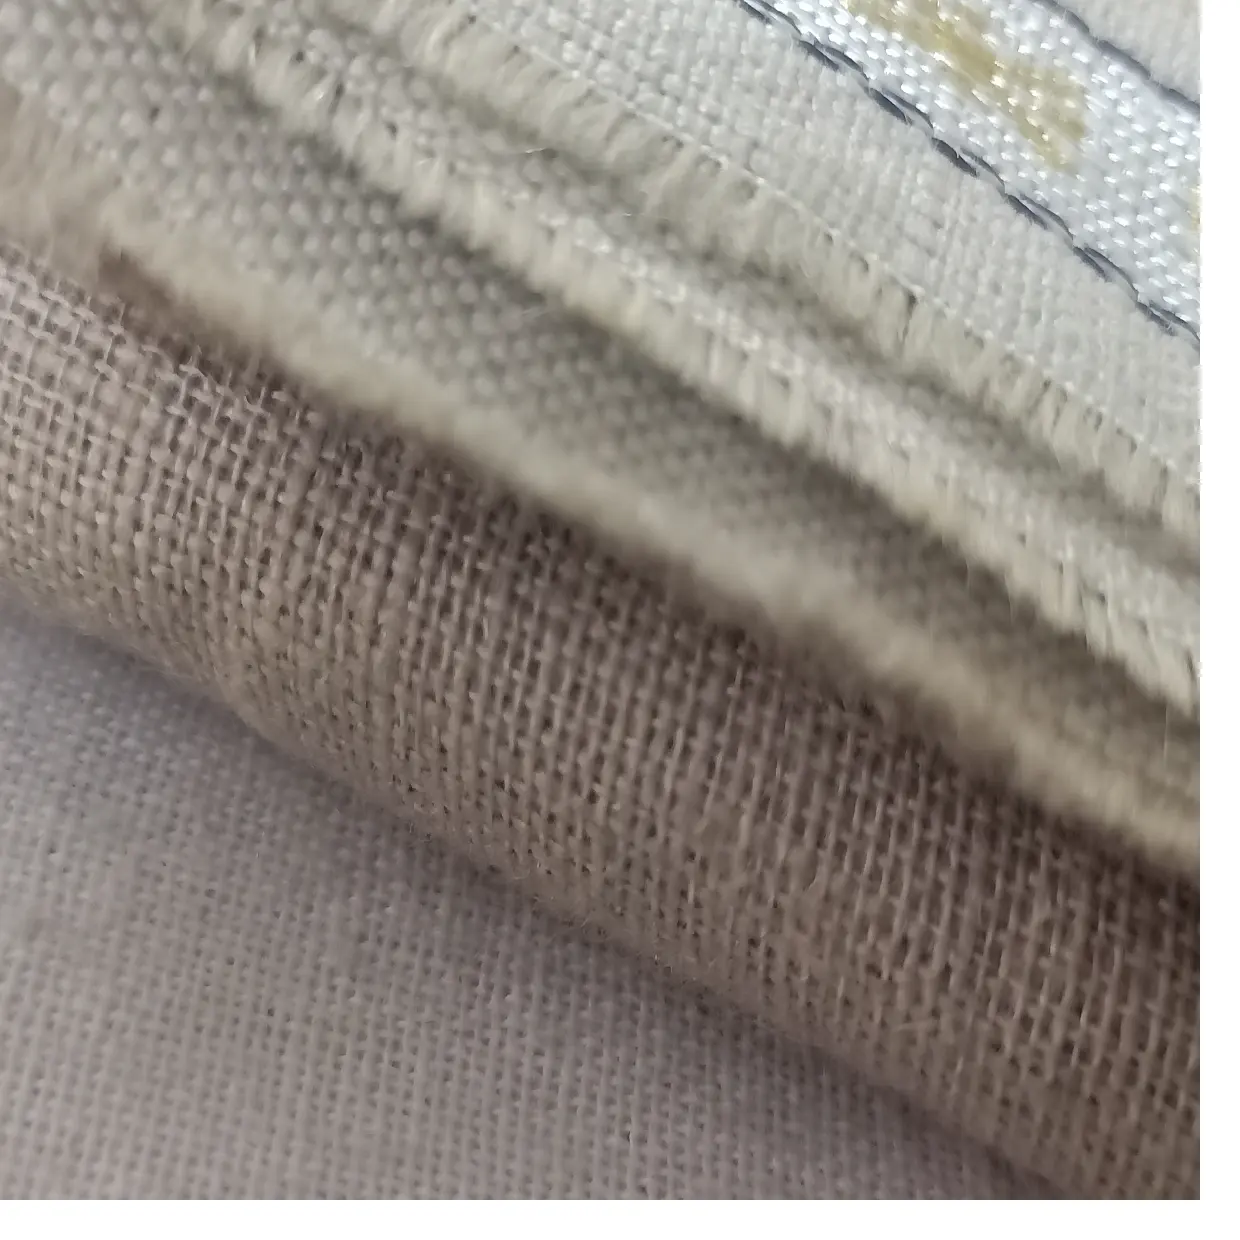 100% linen efabrics in 40 Lea with 58 Inch width ideal for clothing designers for shirts and fabric supply stores for resale